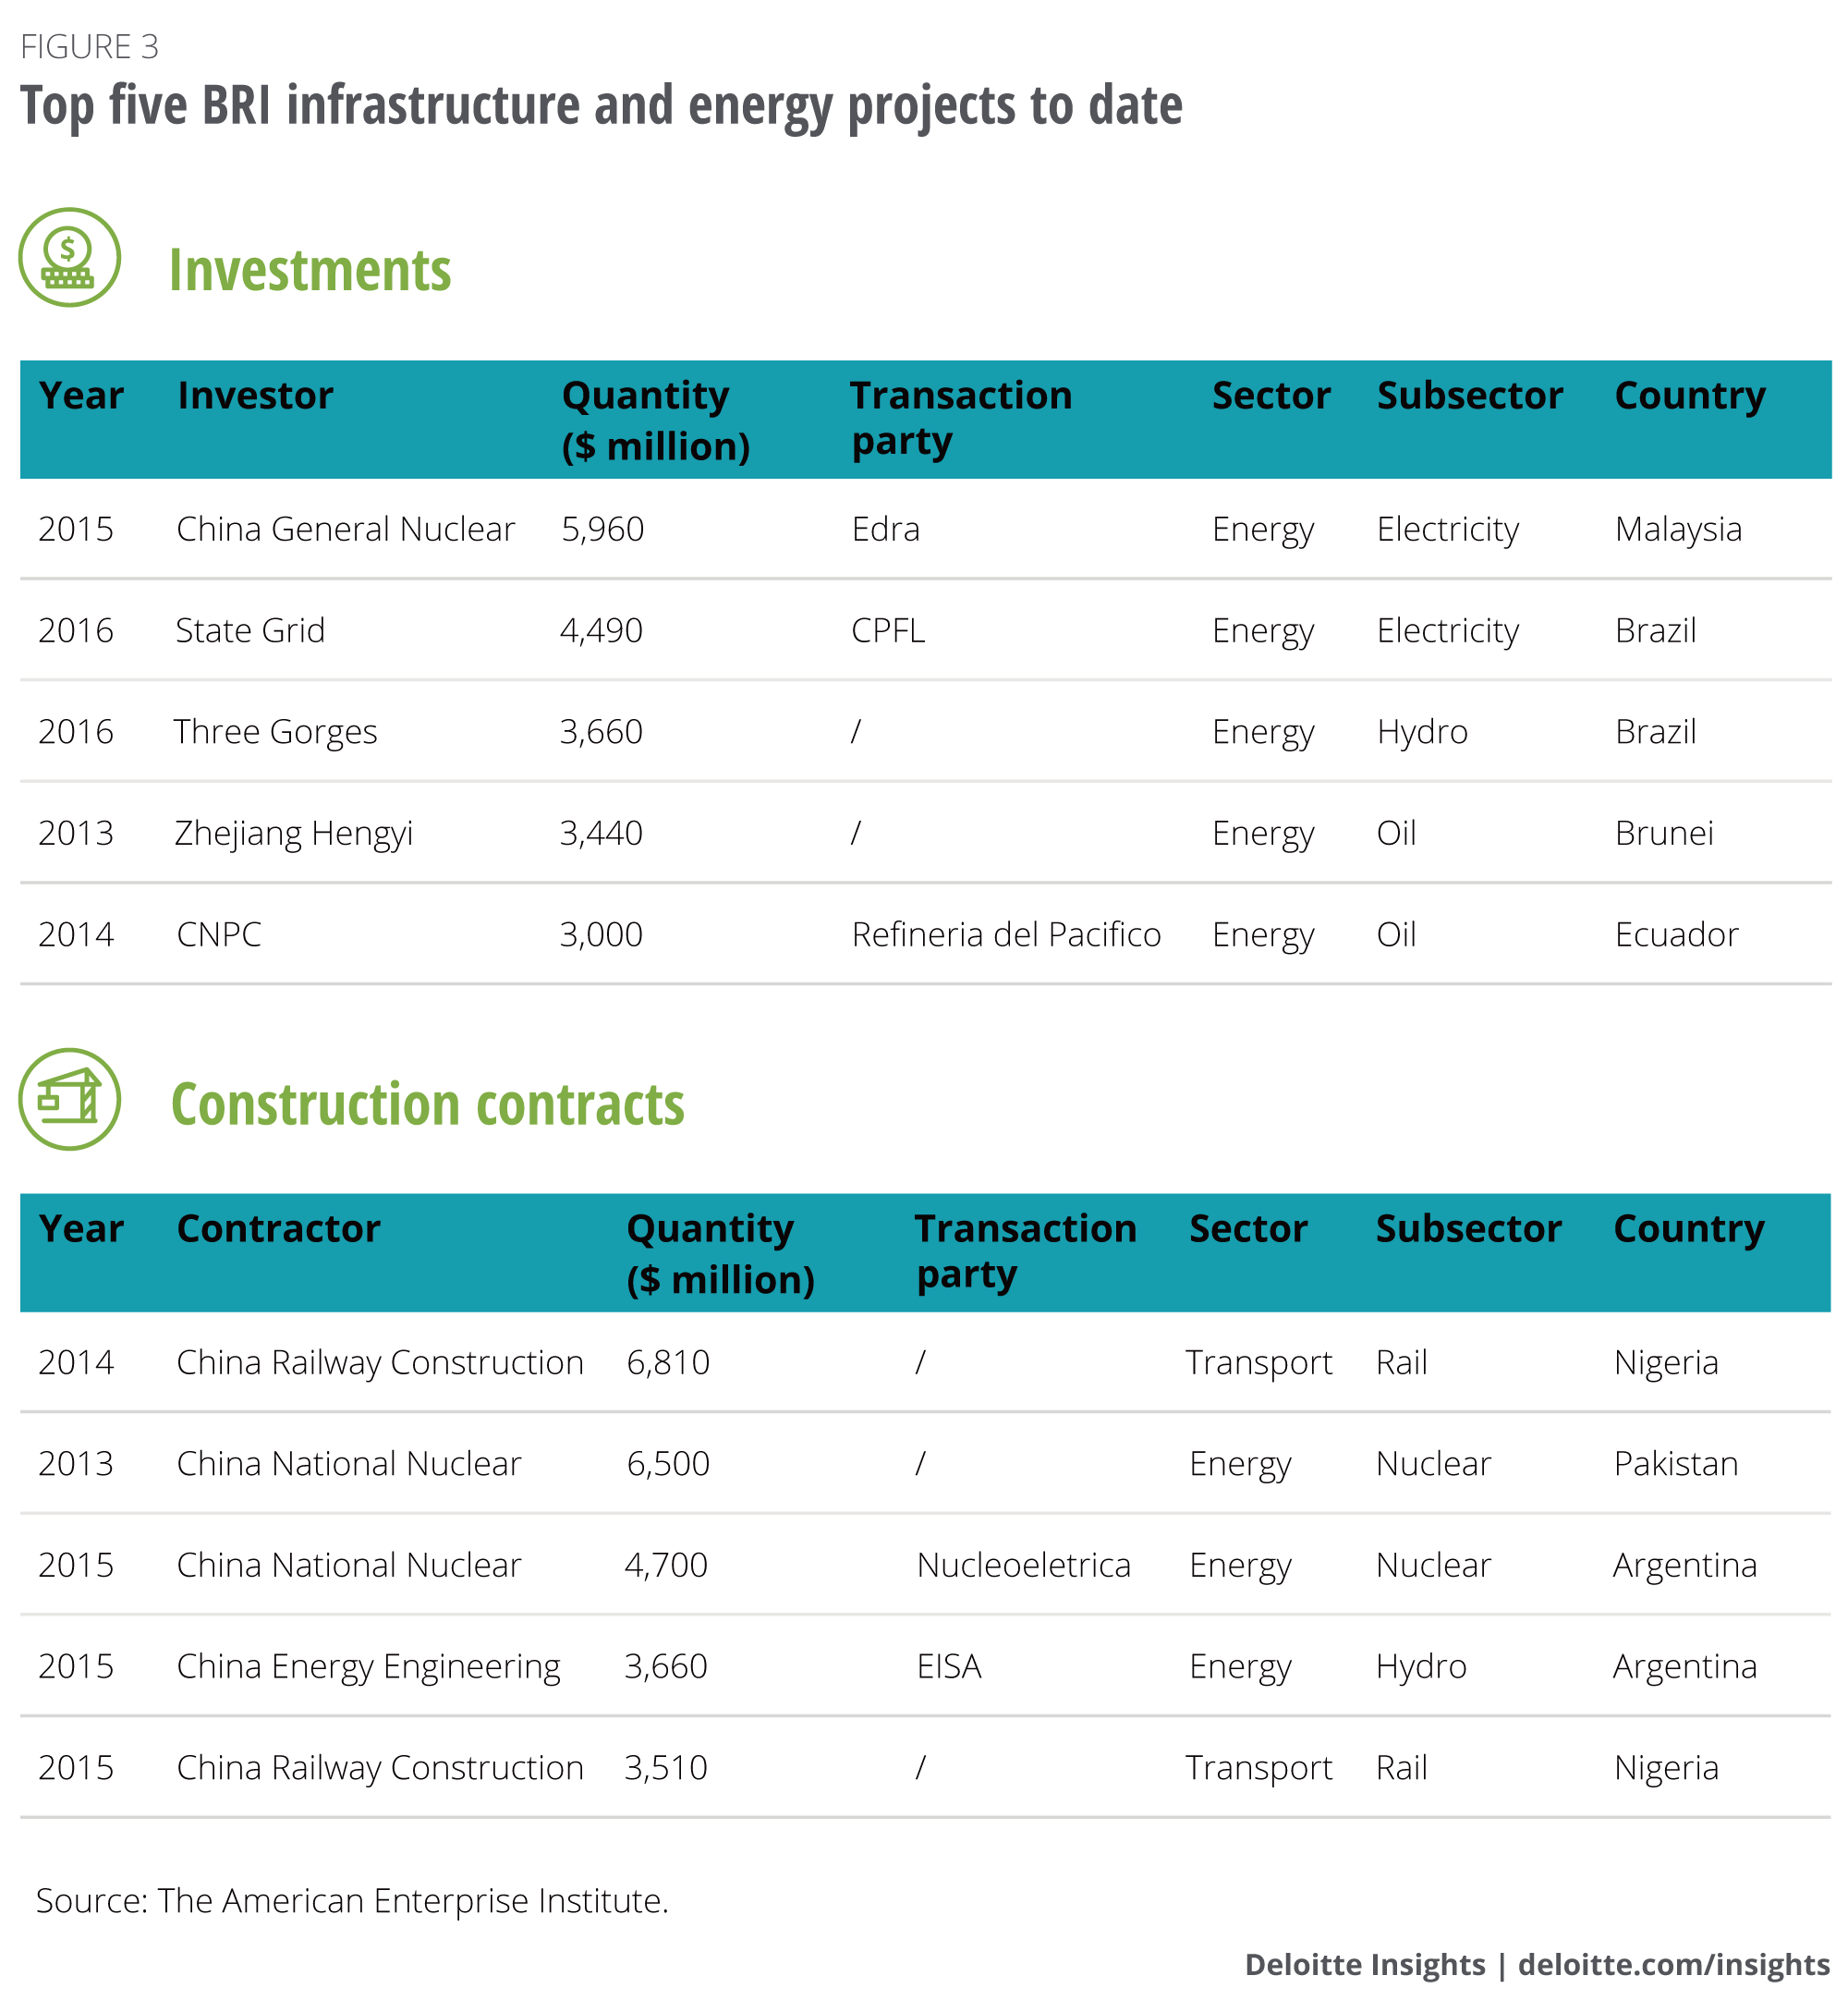 Top five BRI infrastructure and energy projects to date